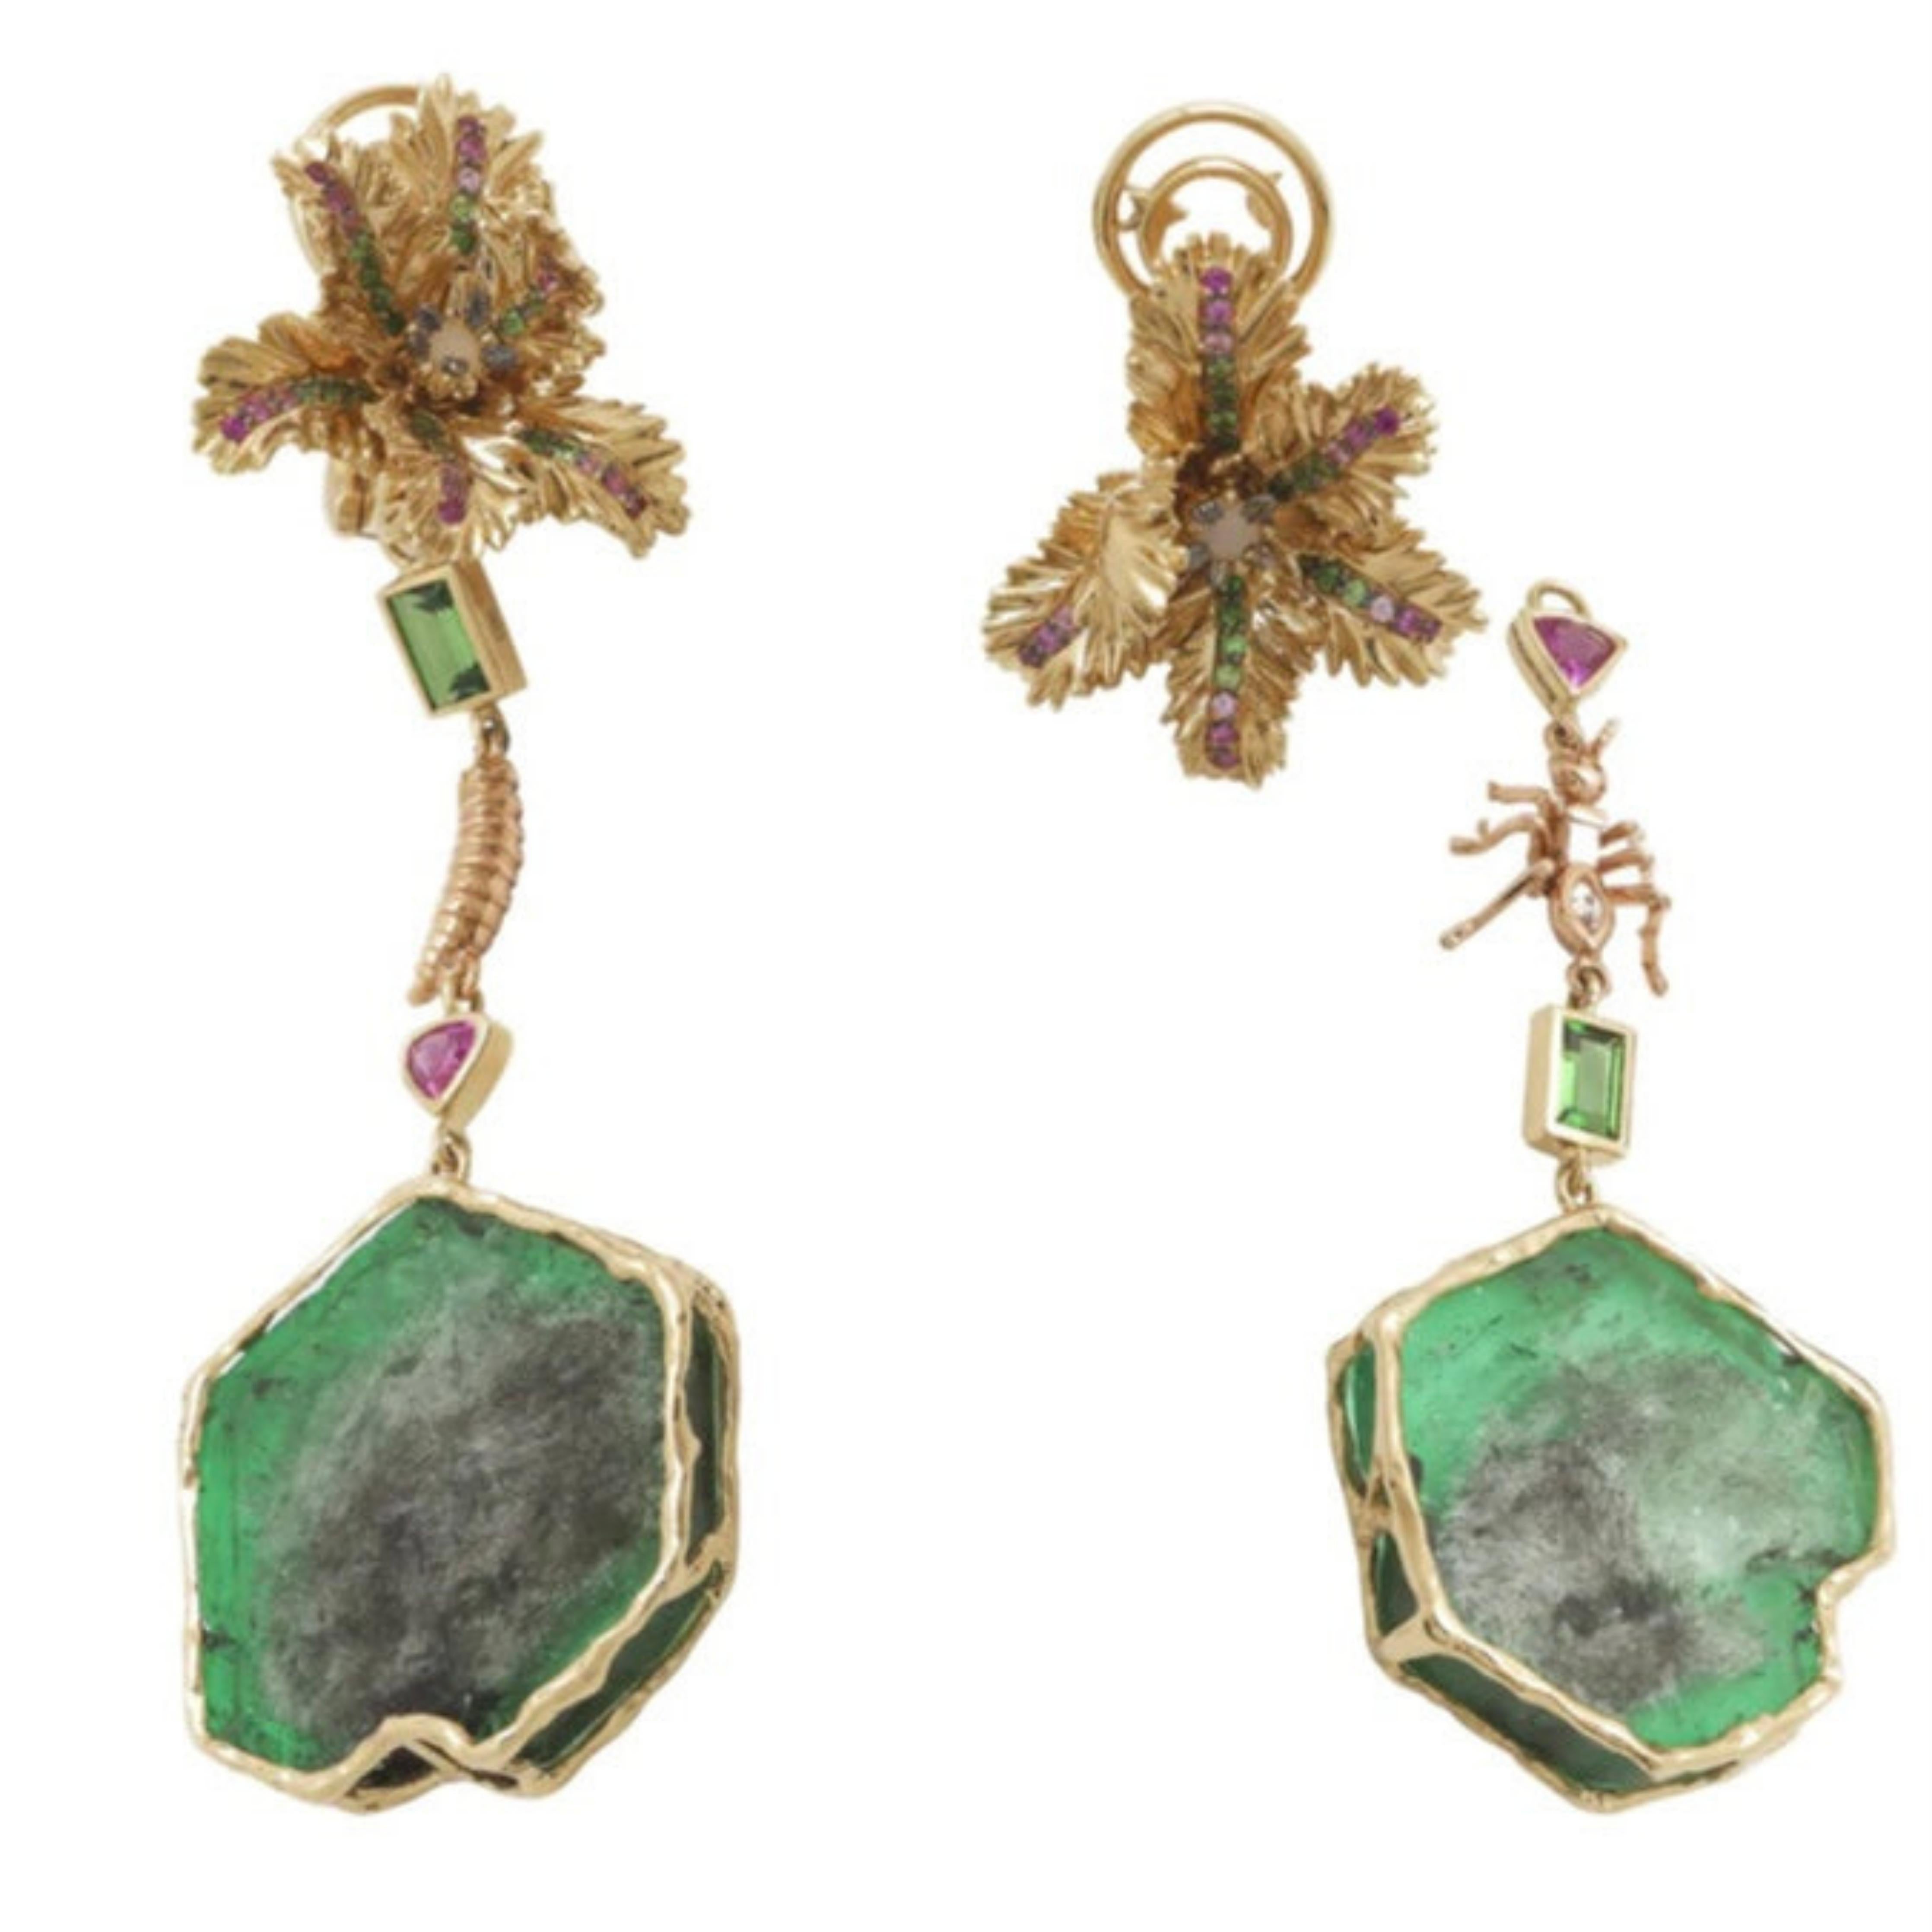 Bibi van der Velden Emerald Slice Earrings One-of-a-kind raw emerald slices set in 18K Yellow Gold flower studs set with pink sapphires, green tsavorites and an opal at the center. Each earring reveals unique details - one with a gold and diamond ant and the other with a rose gold maggot. The emerald slices can be removed to wear just the studs. Shown from the front view with detachable detail.